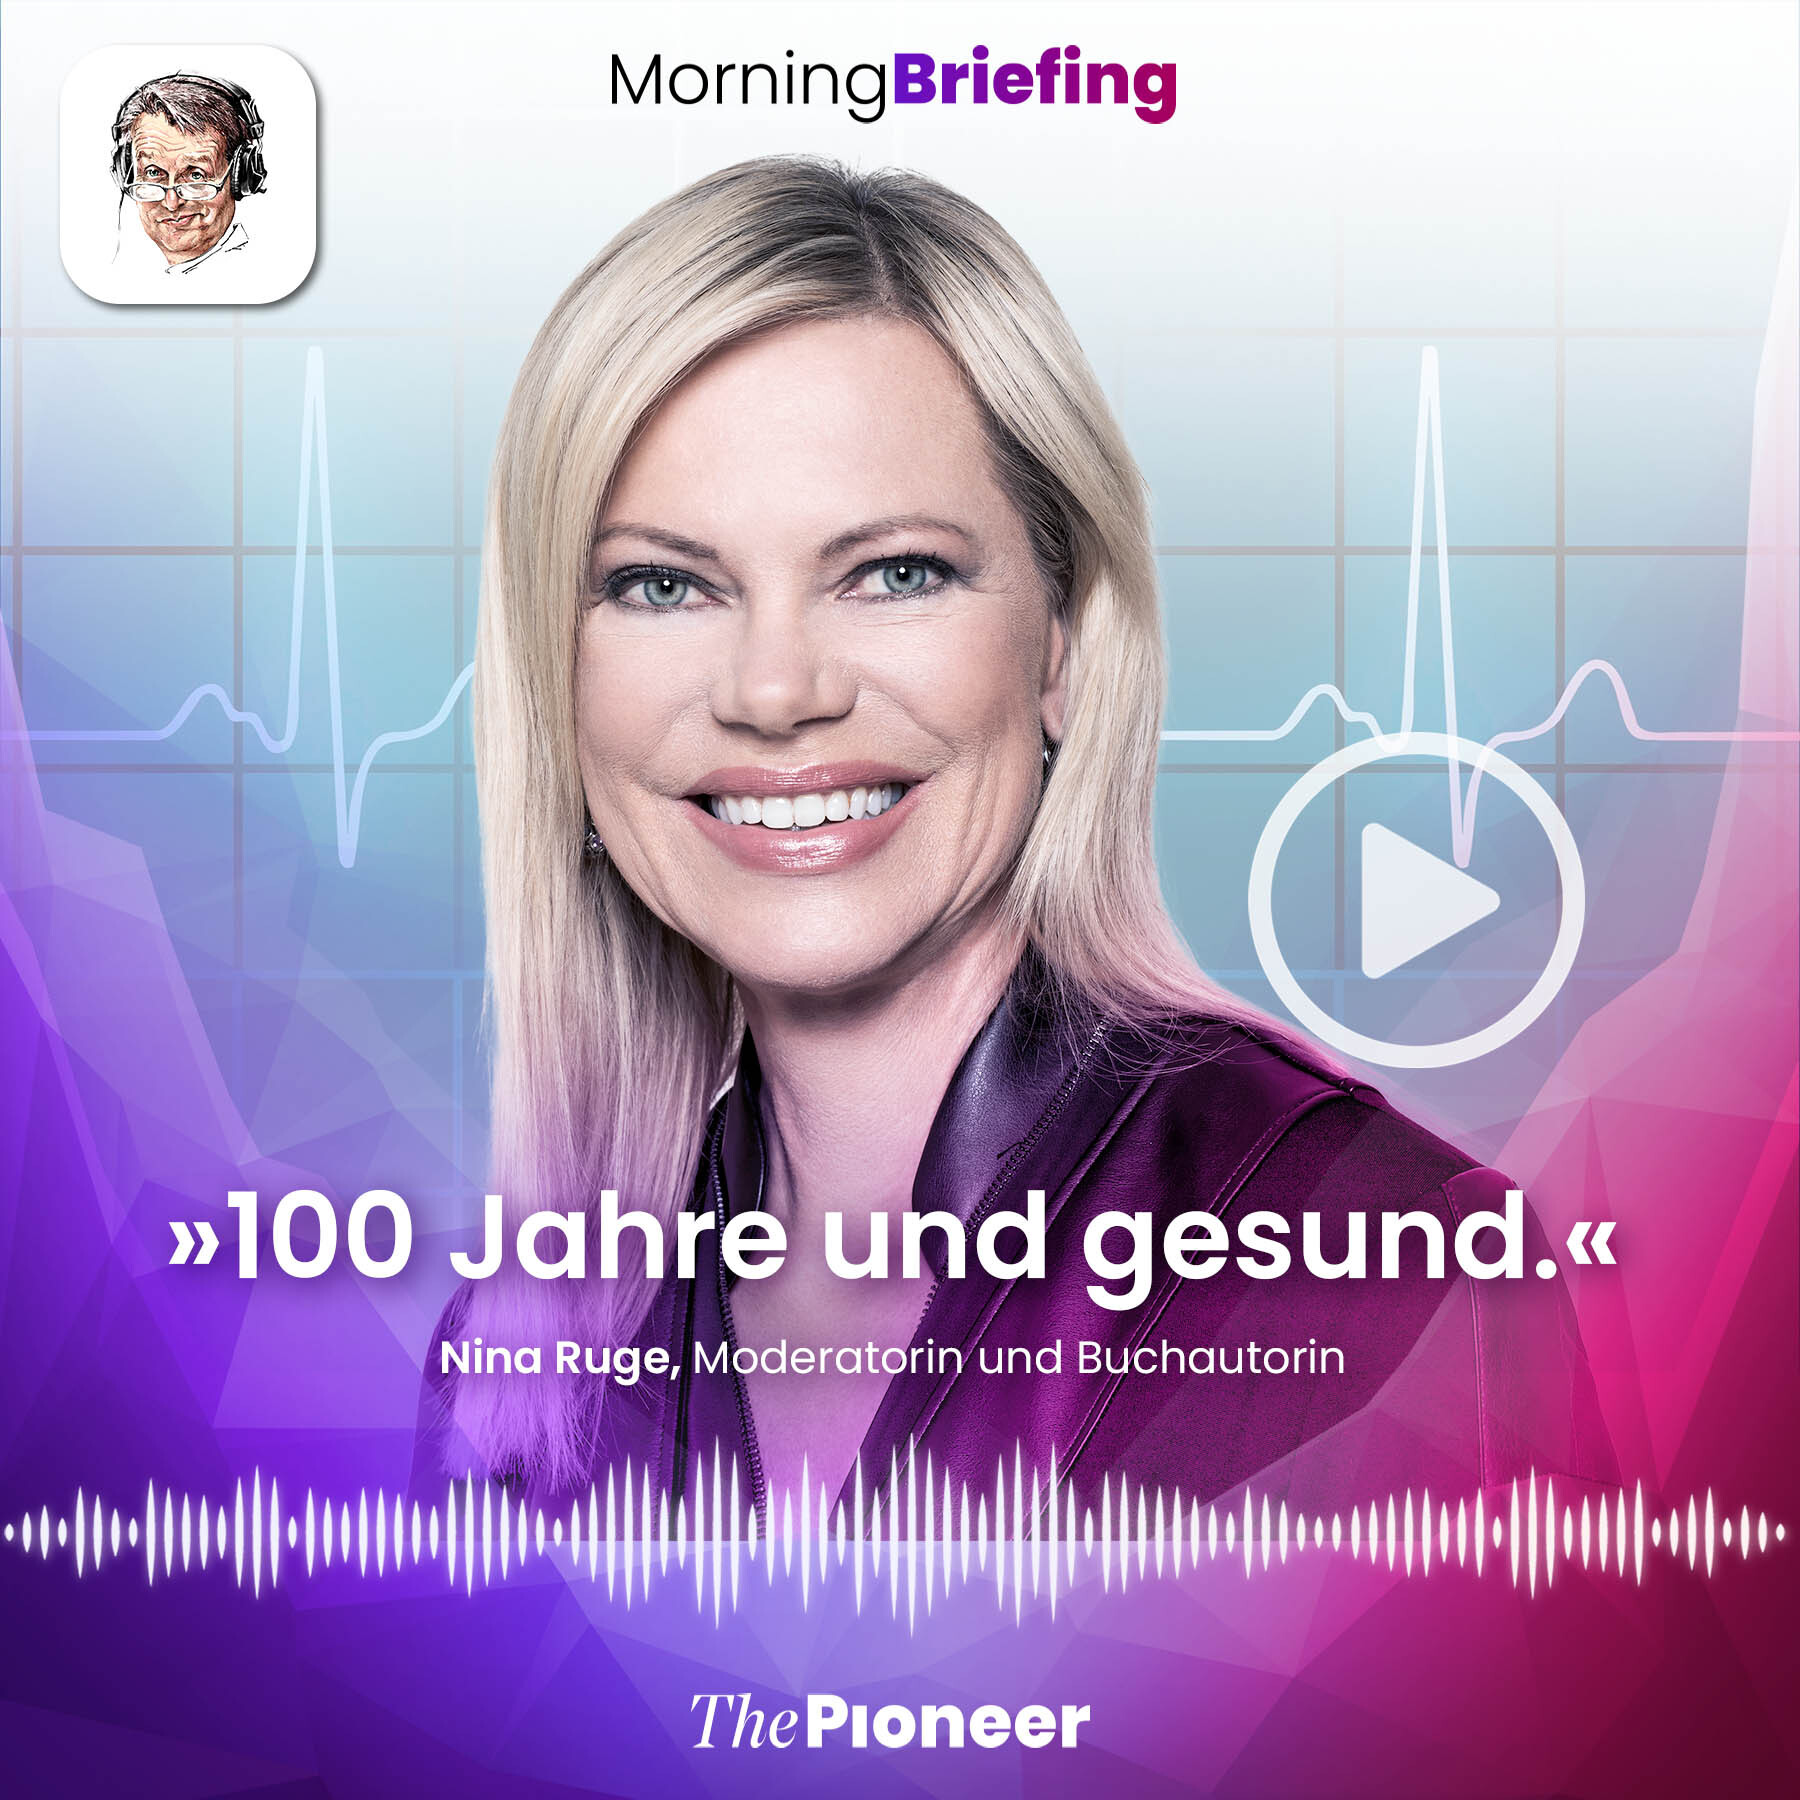 20210802-podcast-morning-briefing-media-pioneer-ruge